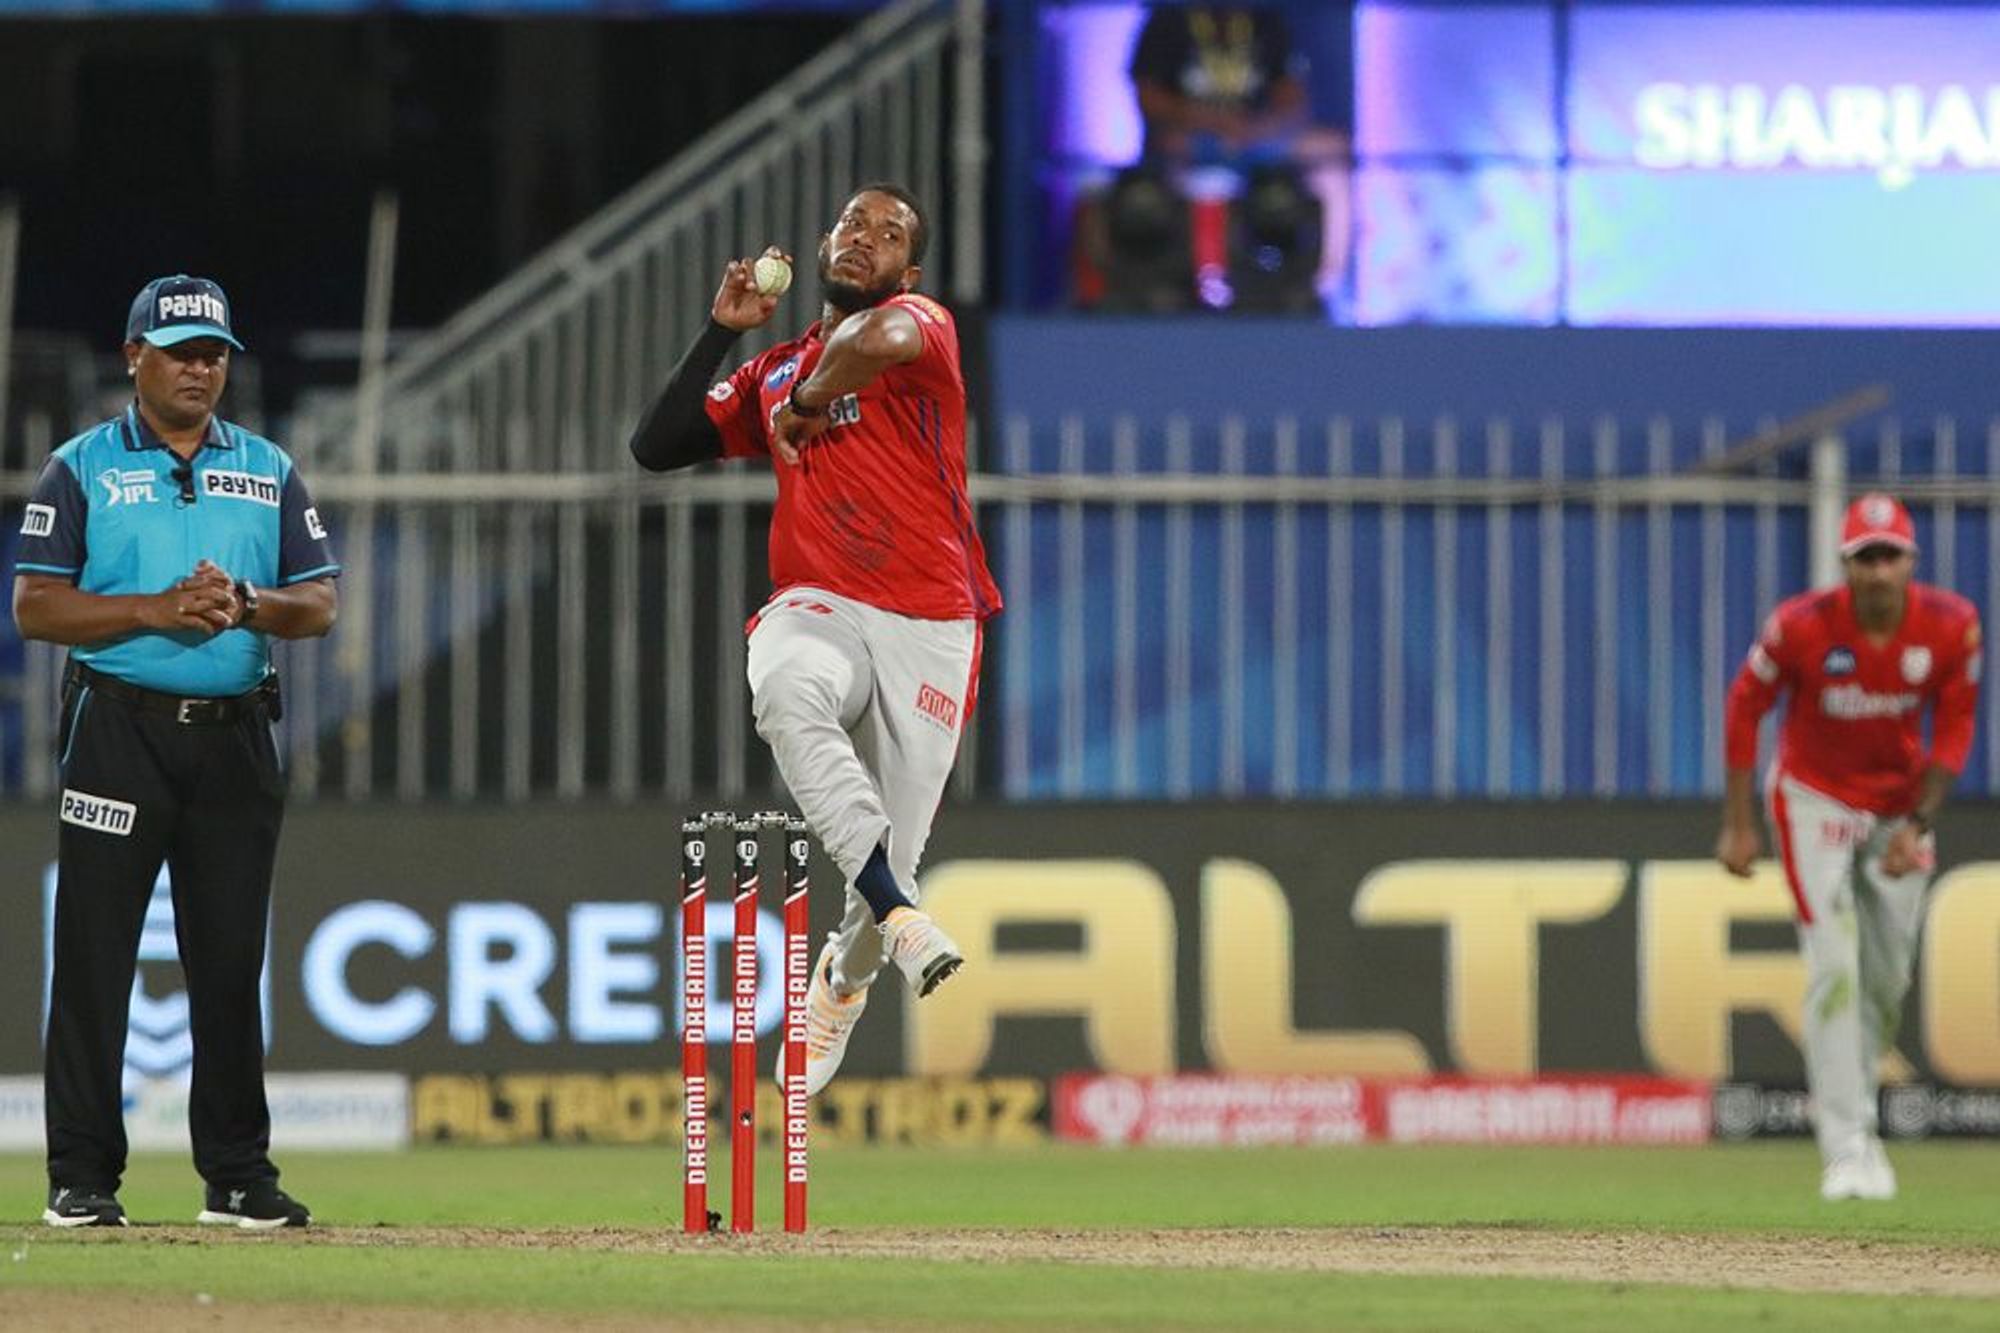 IPL 2020 | Glad that Chris Jordan was able to fight back with the ball, states Lisa Sthalekar